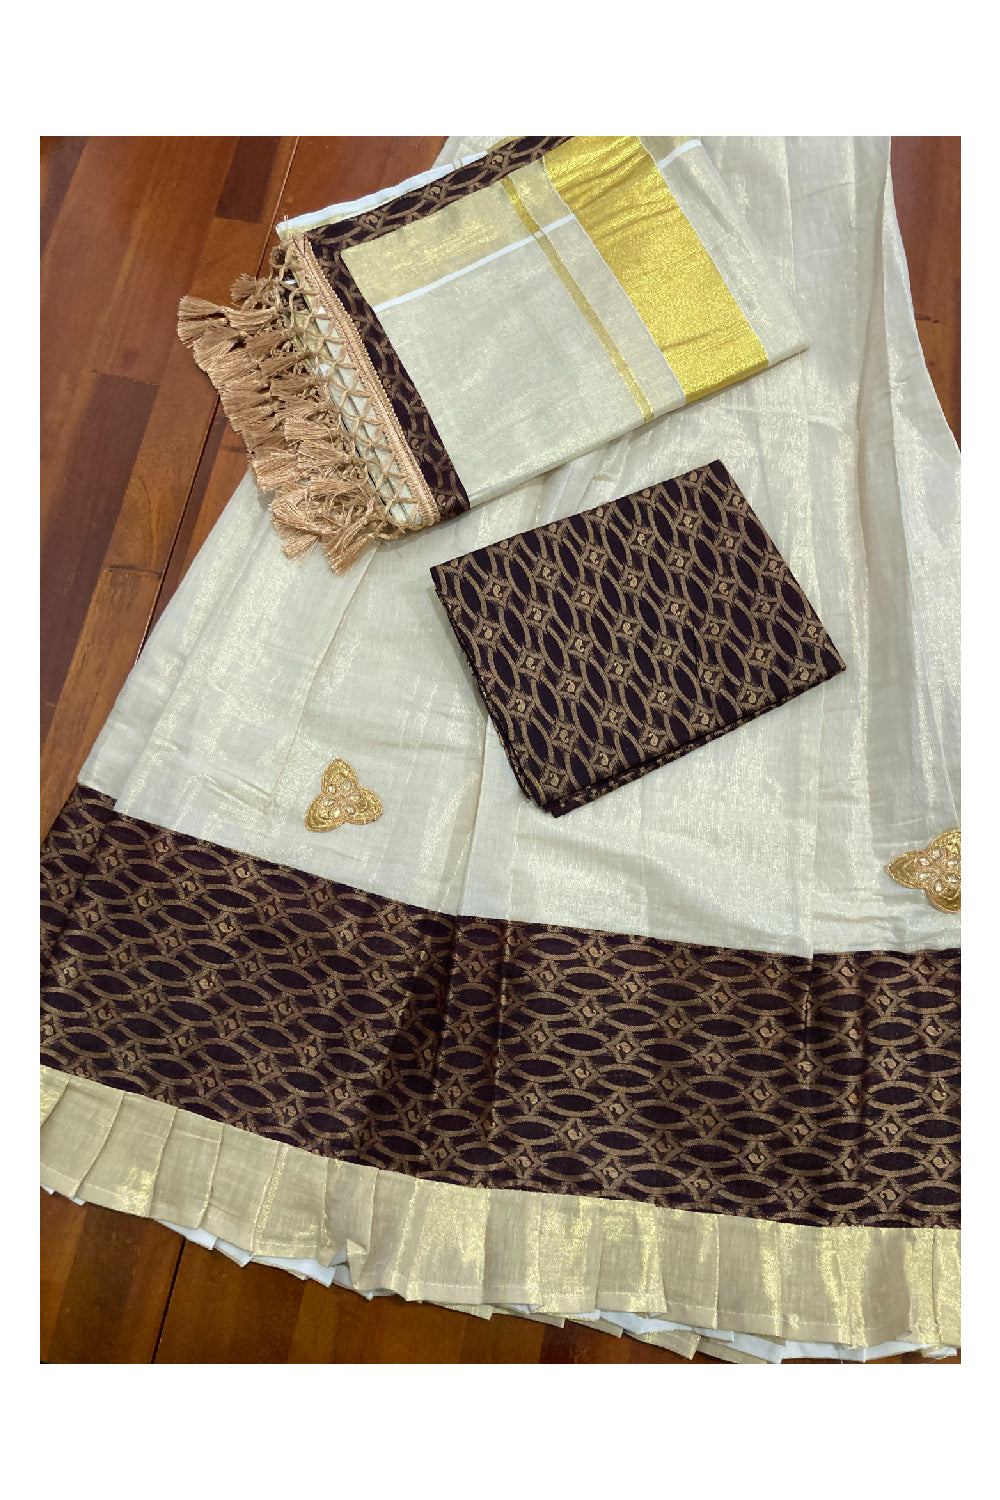 Kerala Tissue Stitched Dhavani Set with Blouse Piece and Neriyathu in with Brown Accents